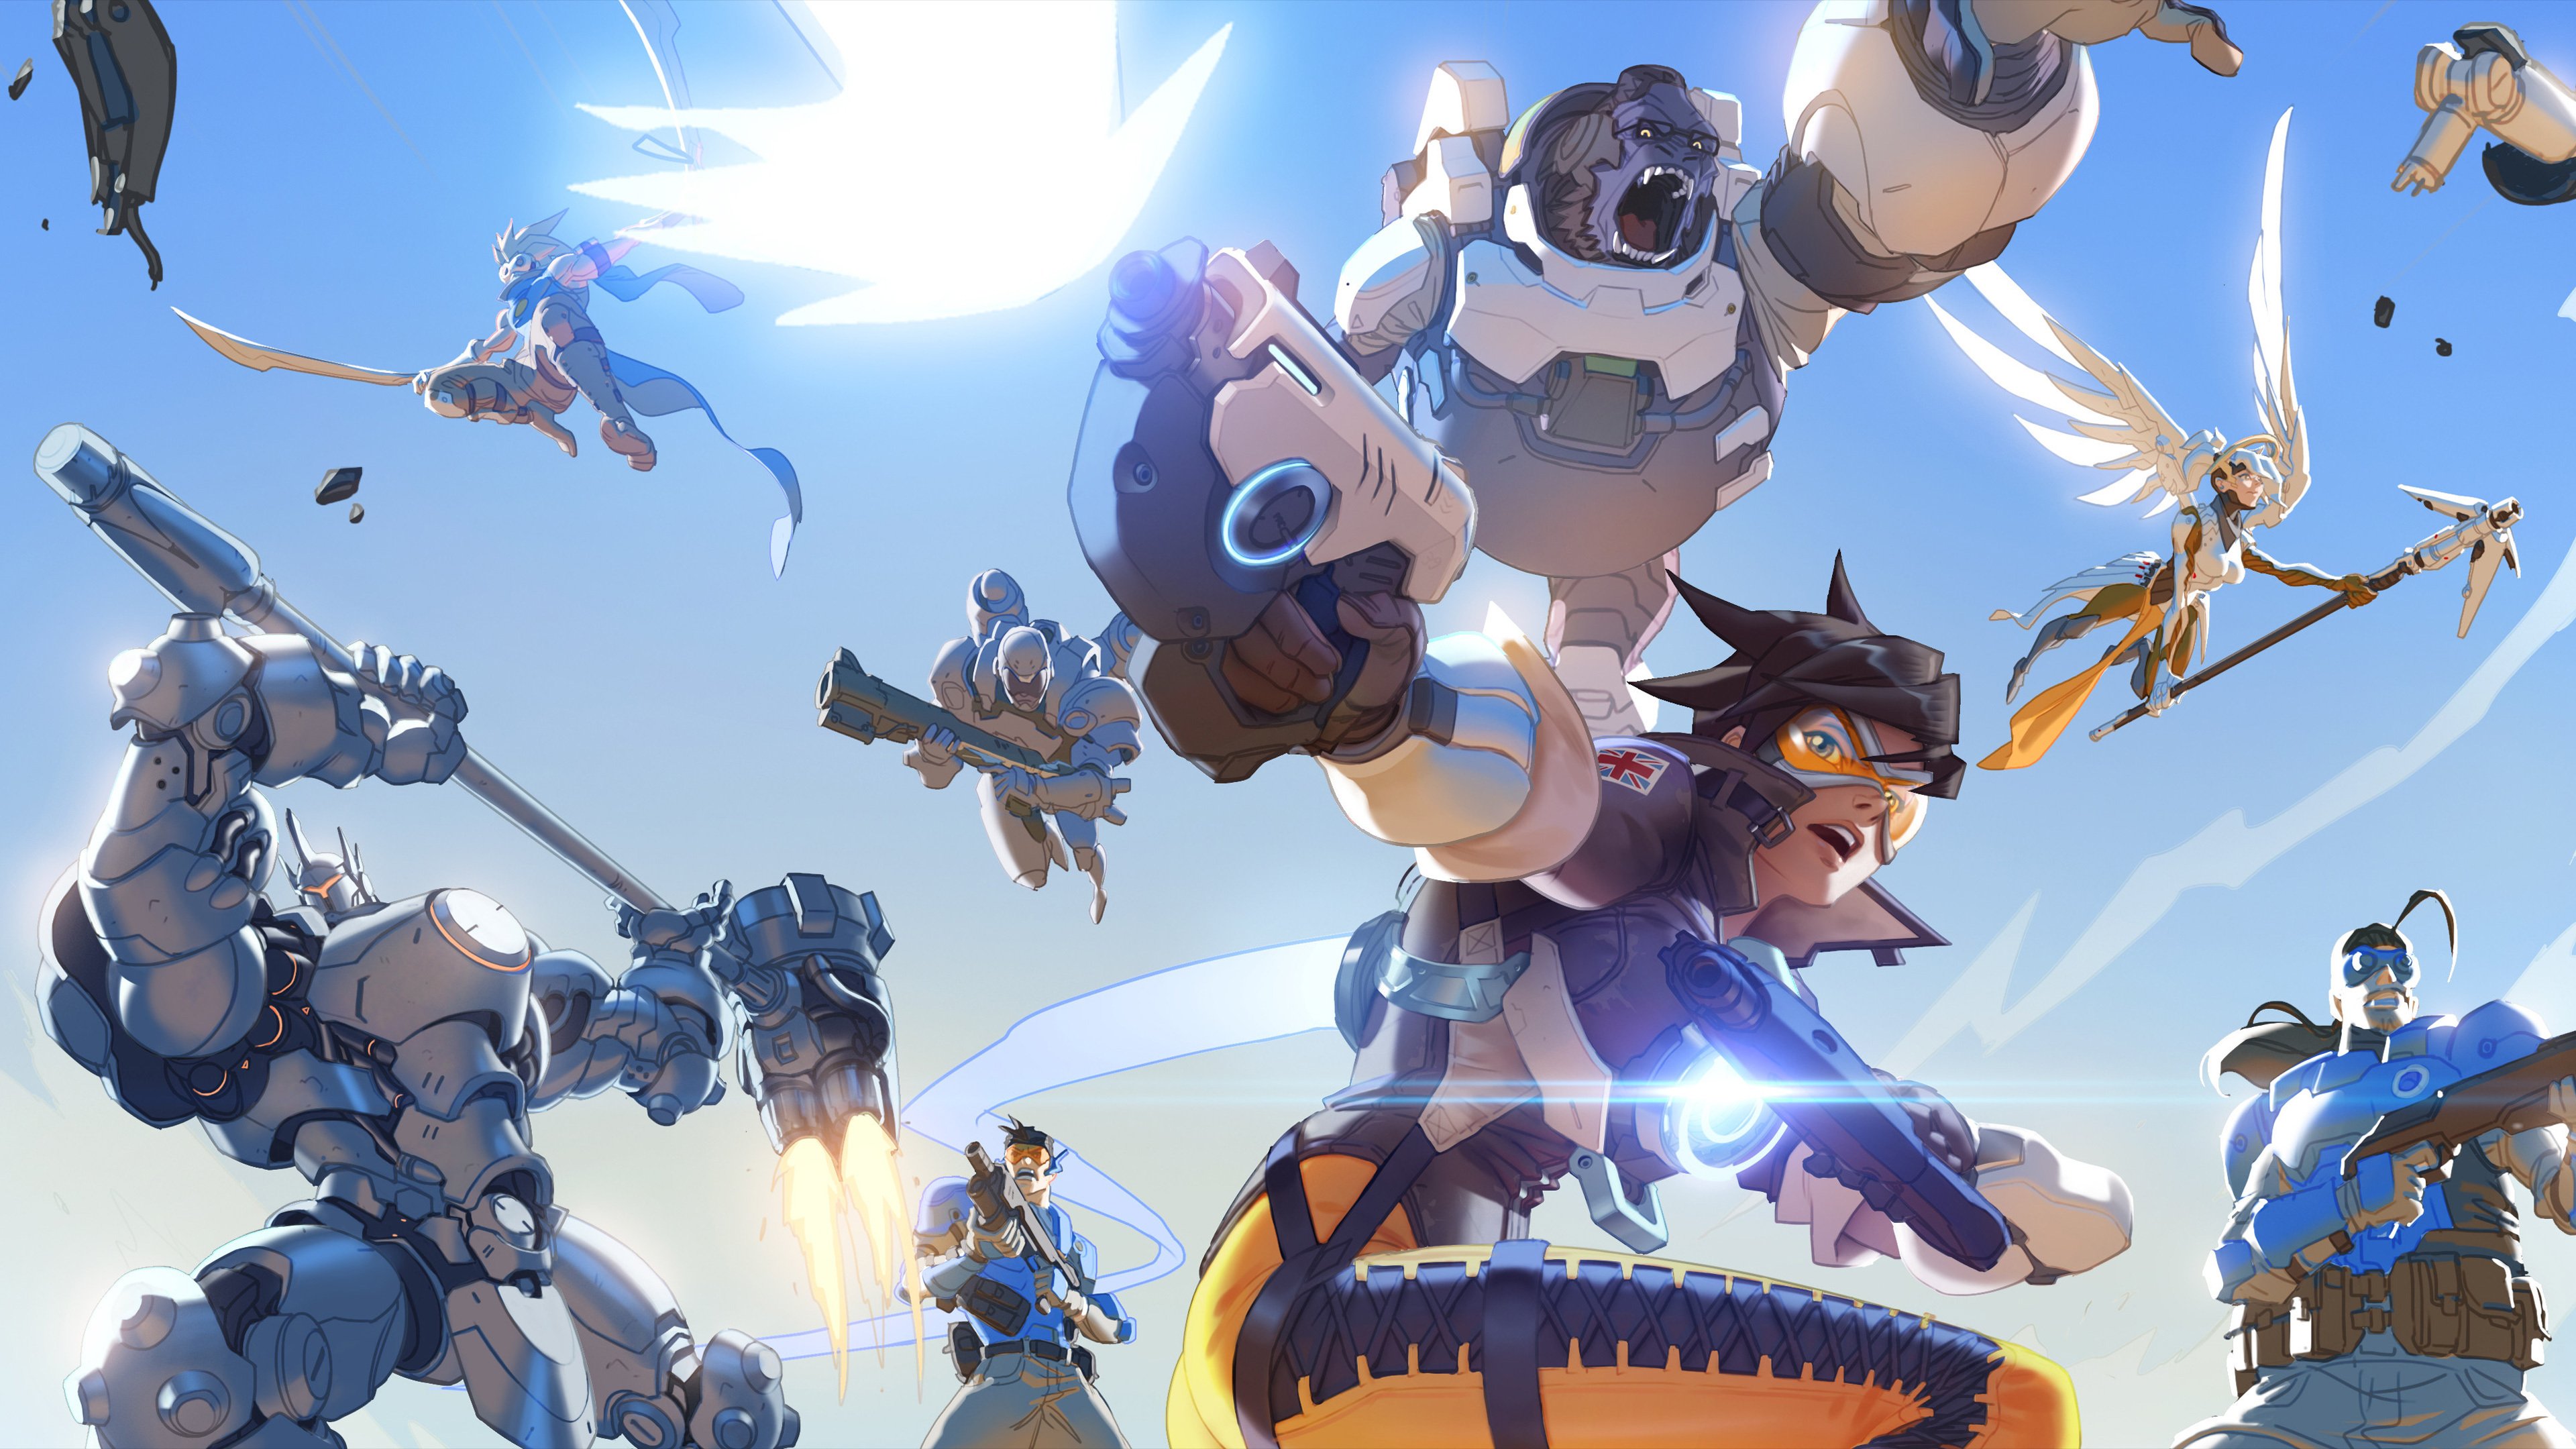 overwatch, Shooter, Action, Fighting, Mecha, Sci fi, Strategy Wallpaper